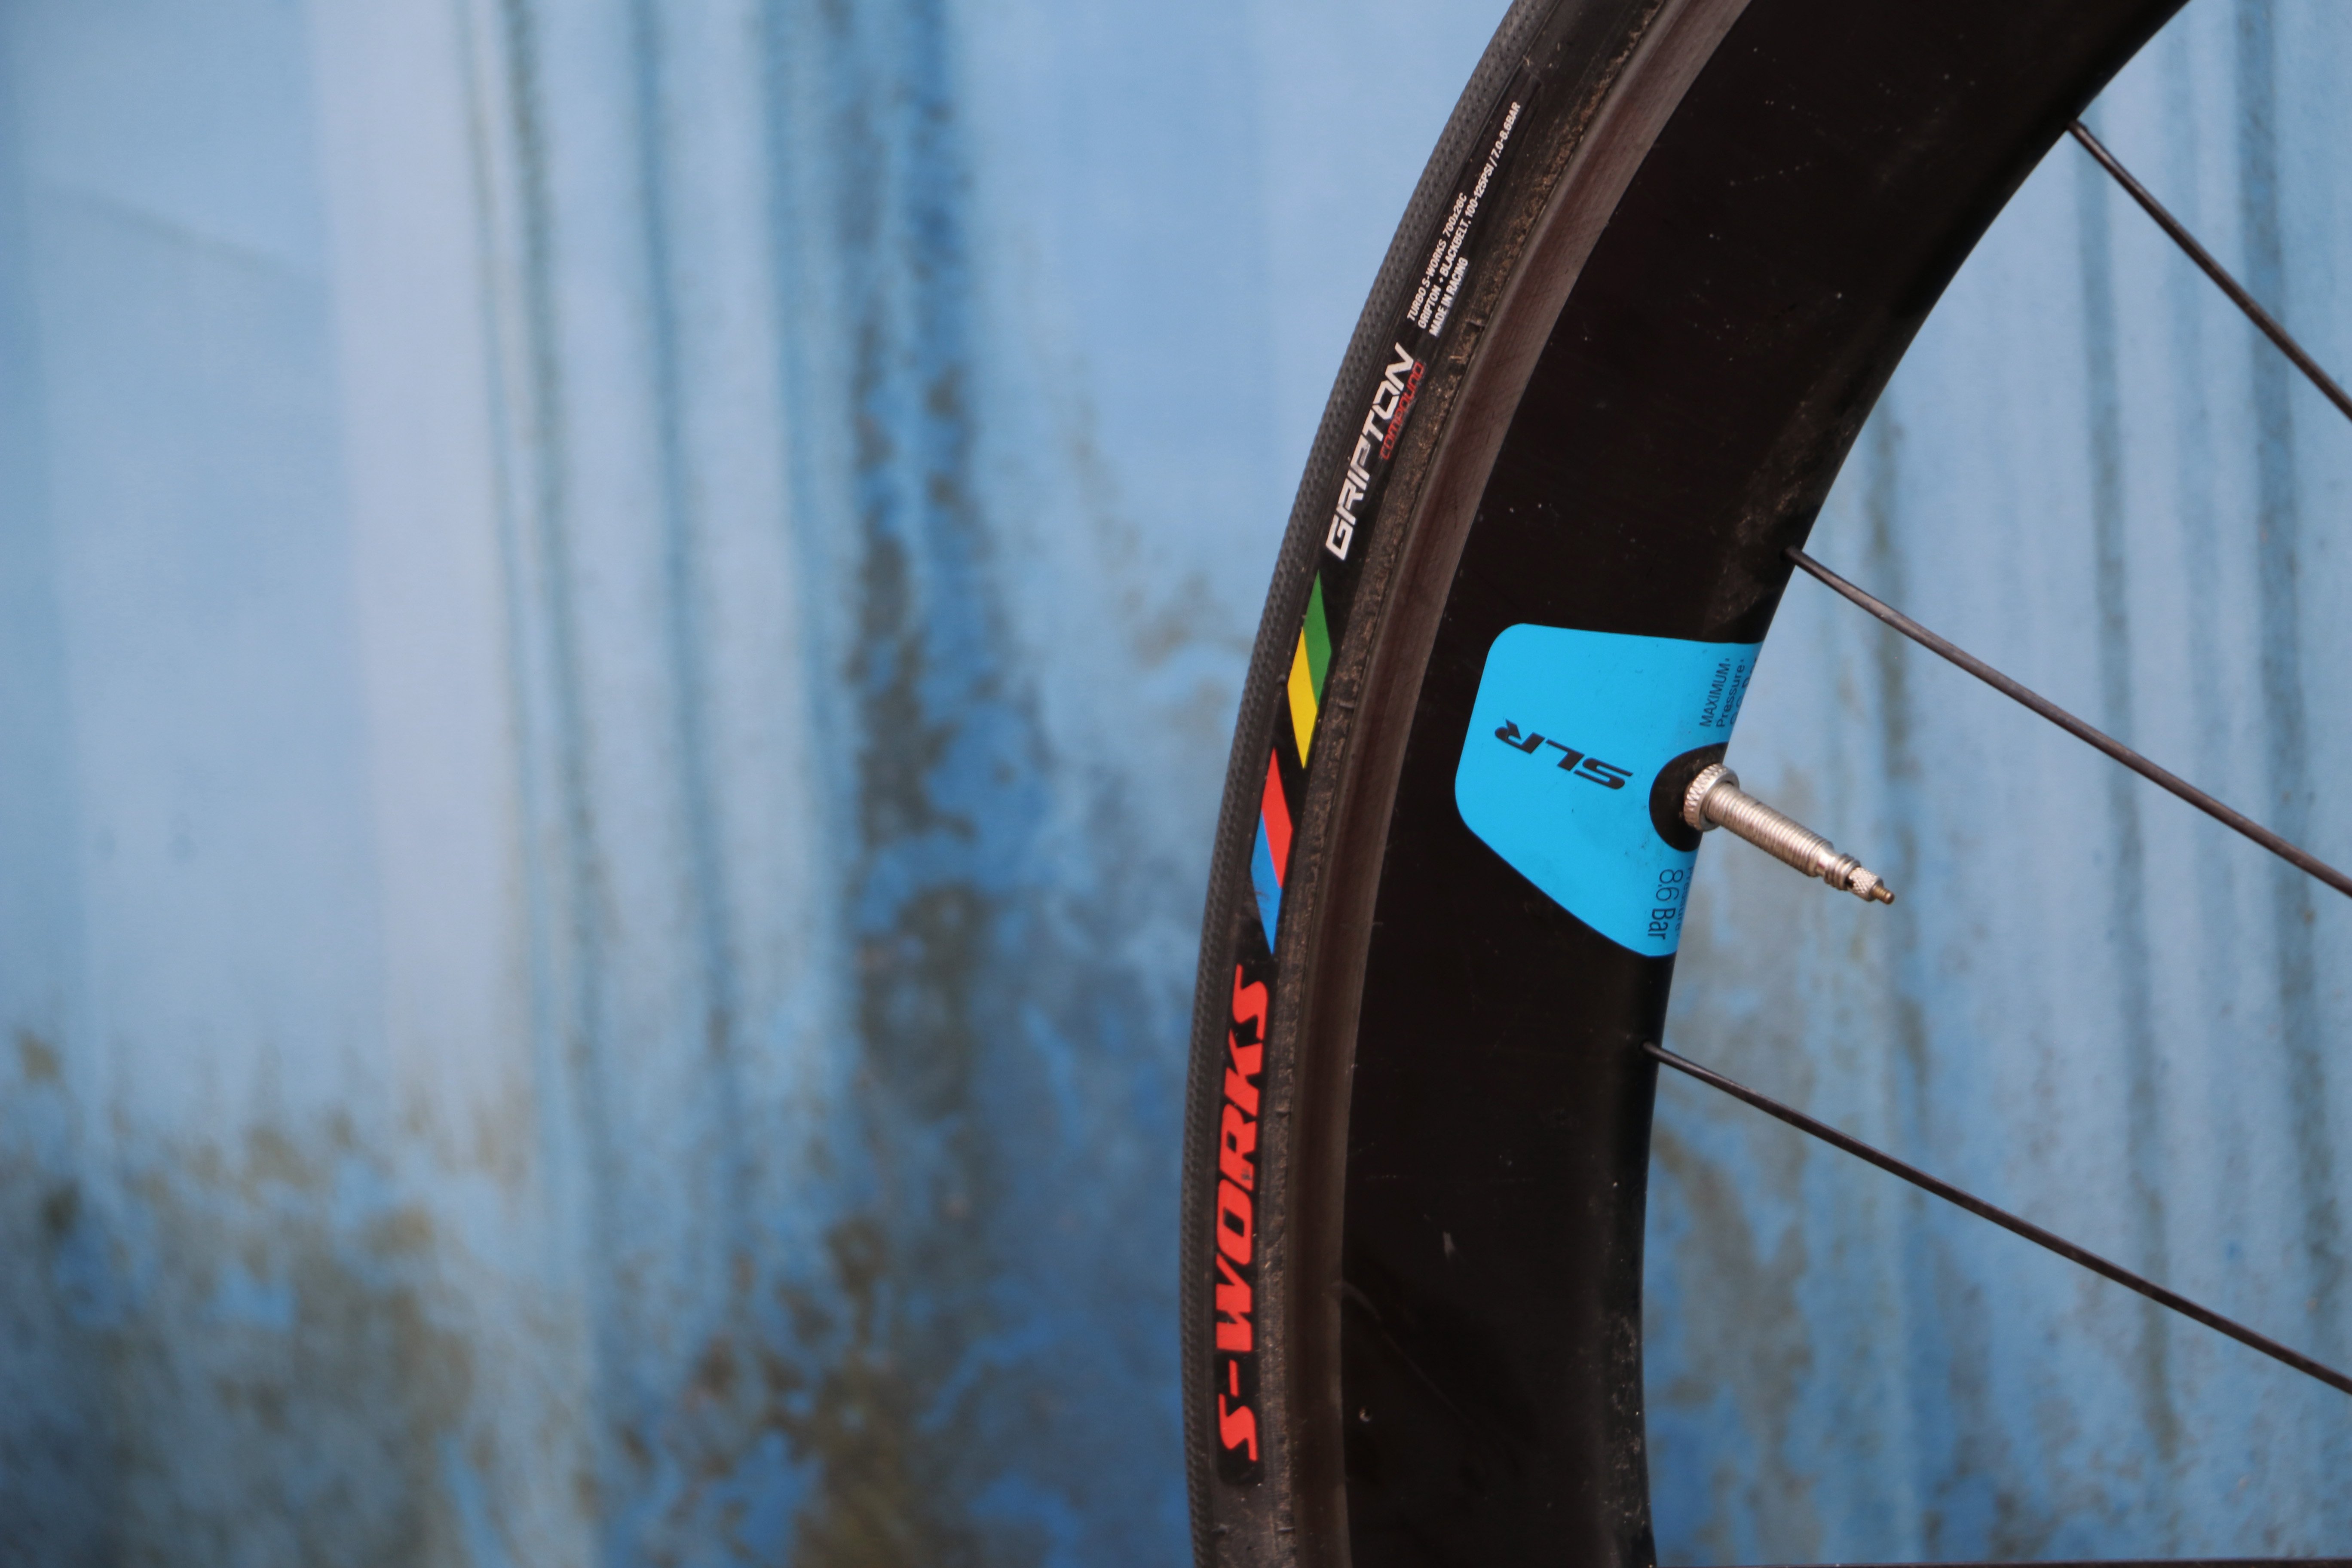 specialized s works tyres